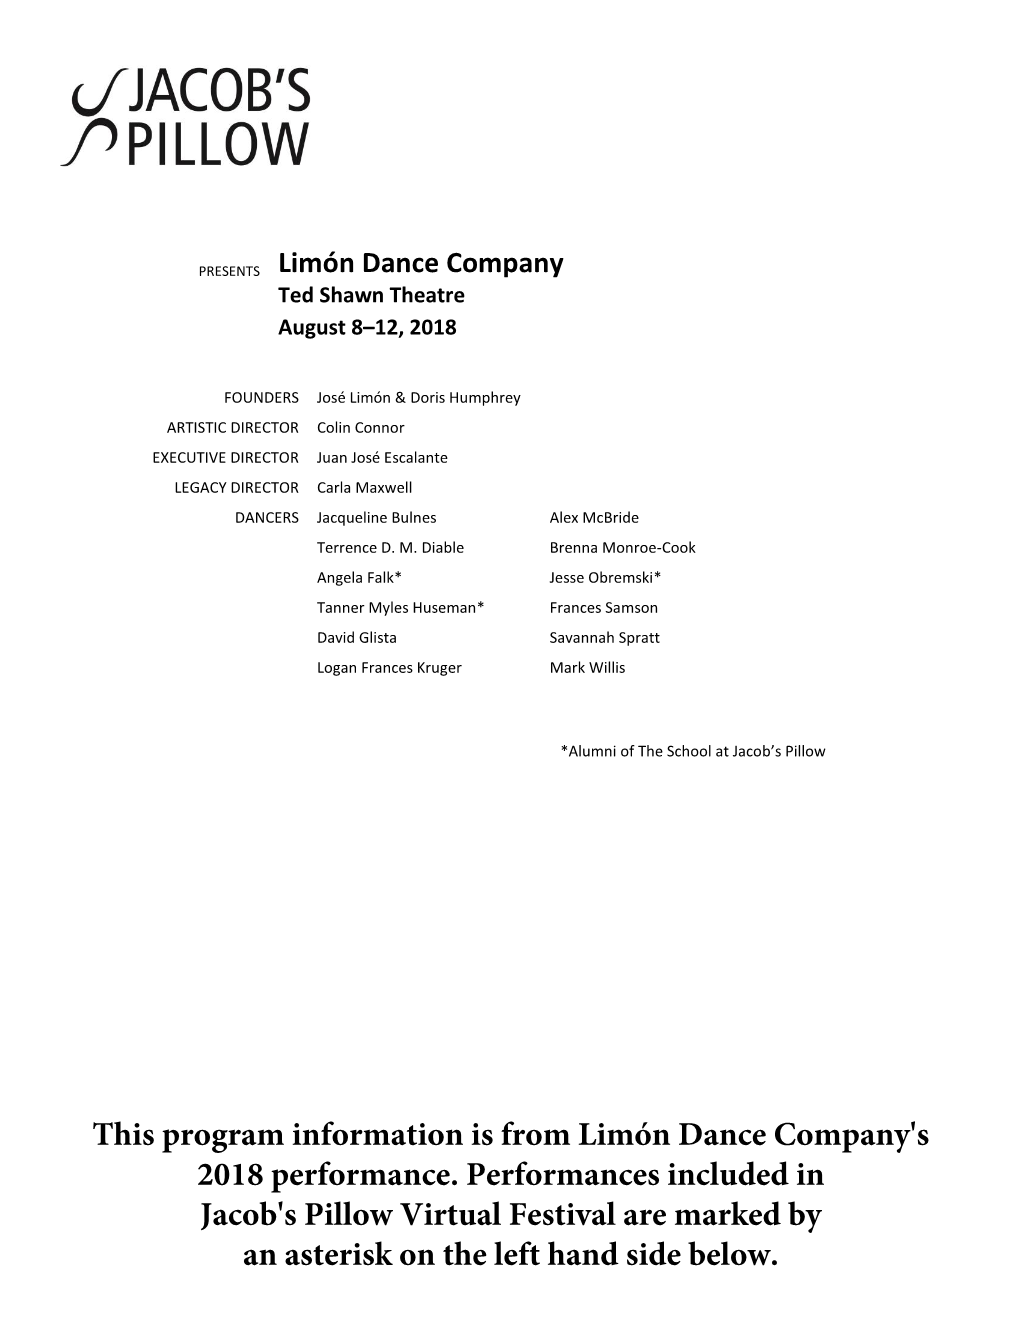 This Program Information Is from Limón Dance Company's 2018 Performance